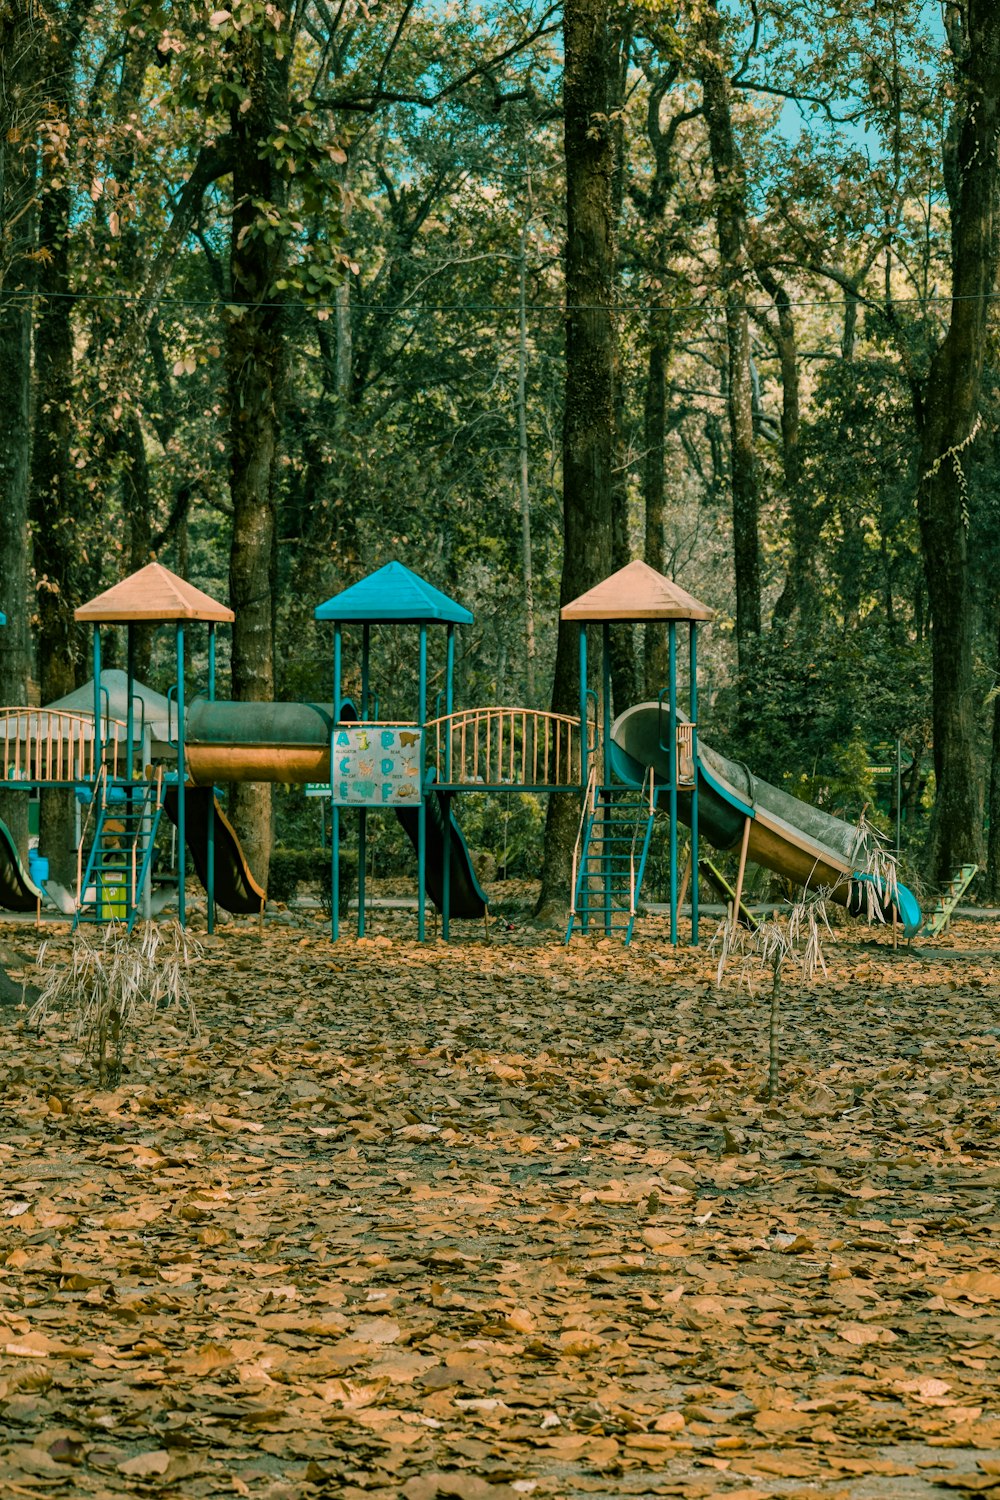 a playground in the middle of a wooded area